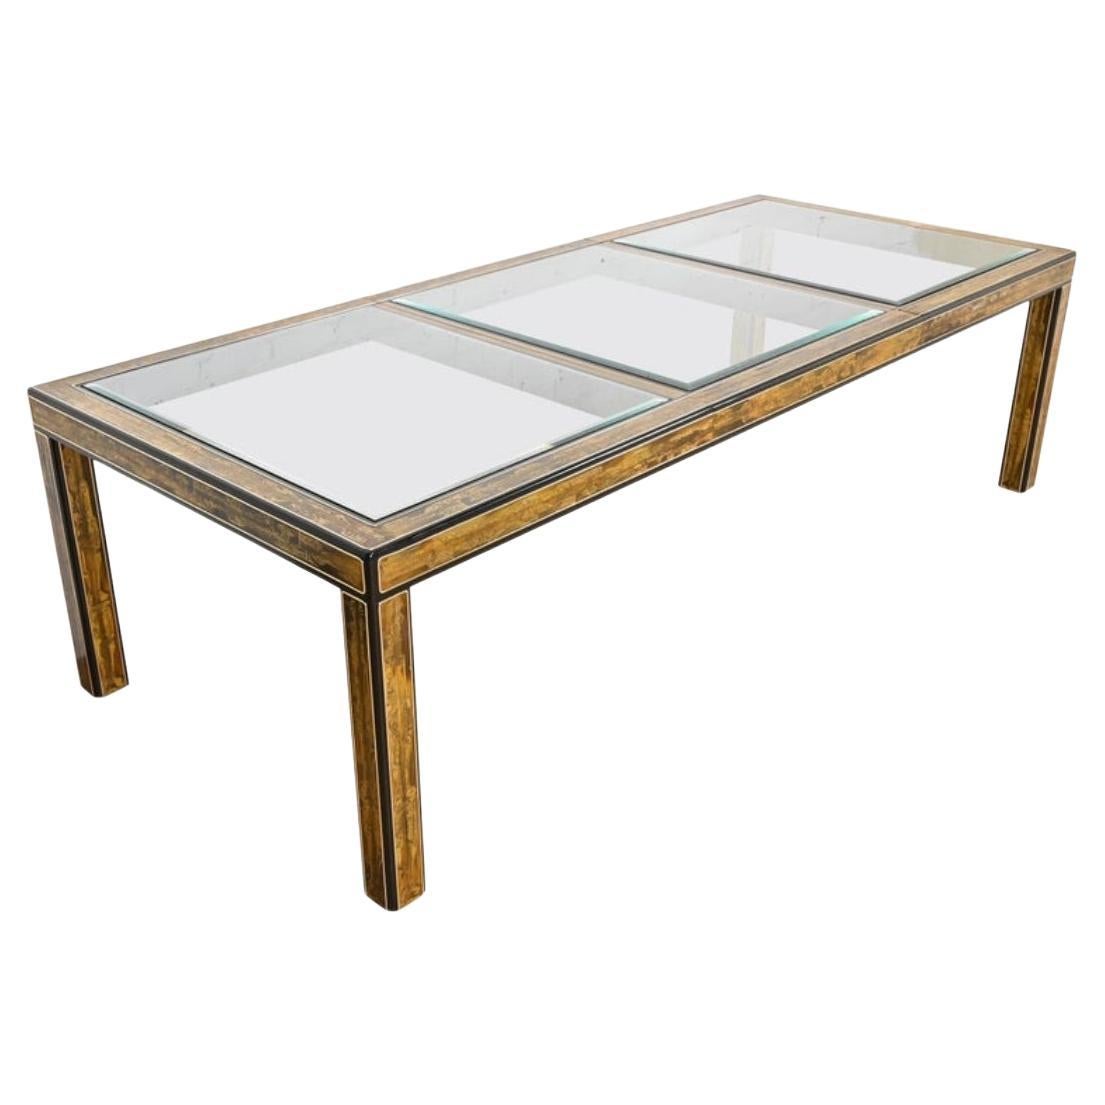 Bernhard Rohne for Mastercraft Dining Table
having glass inserts
table height 29 1/2 t  x  43 1/2